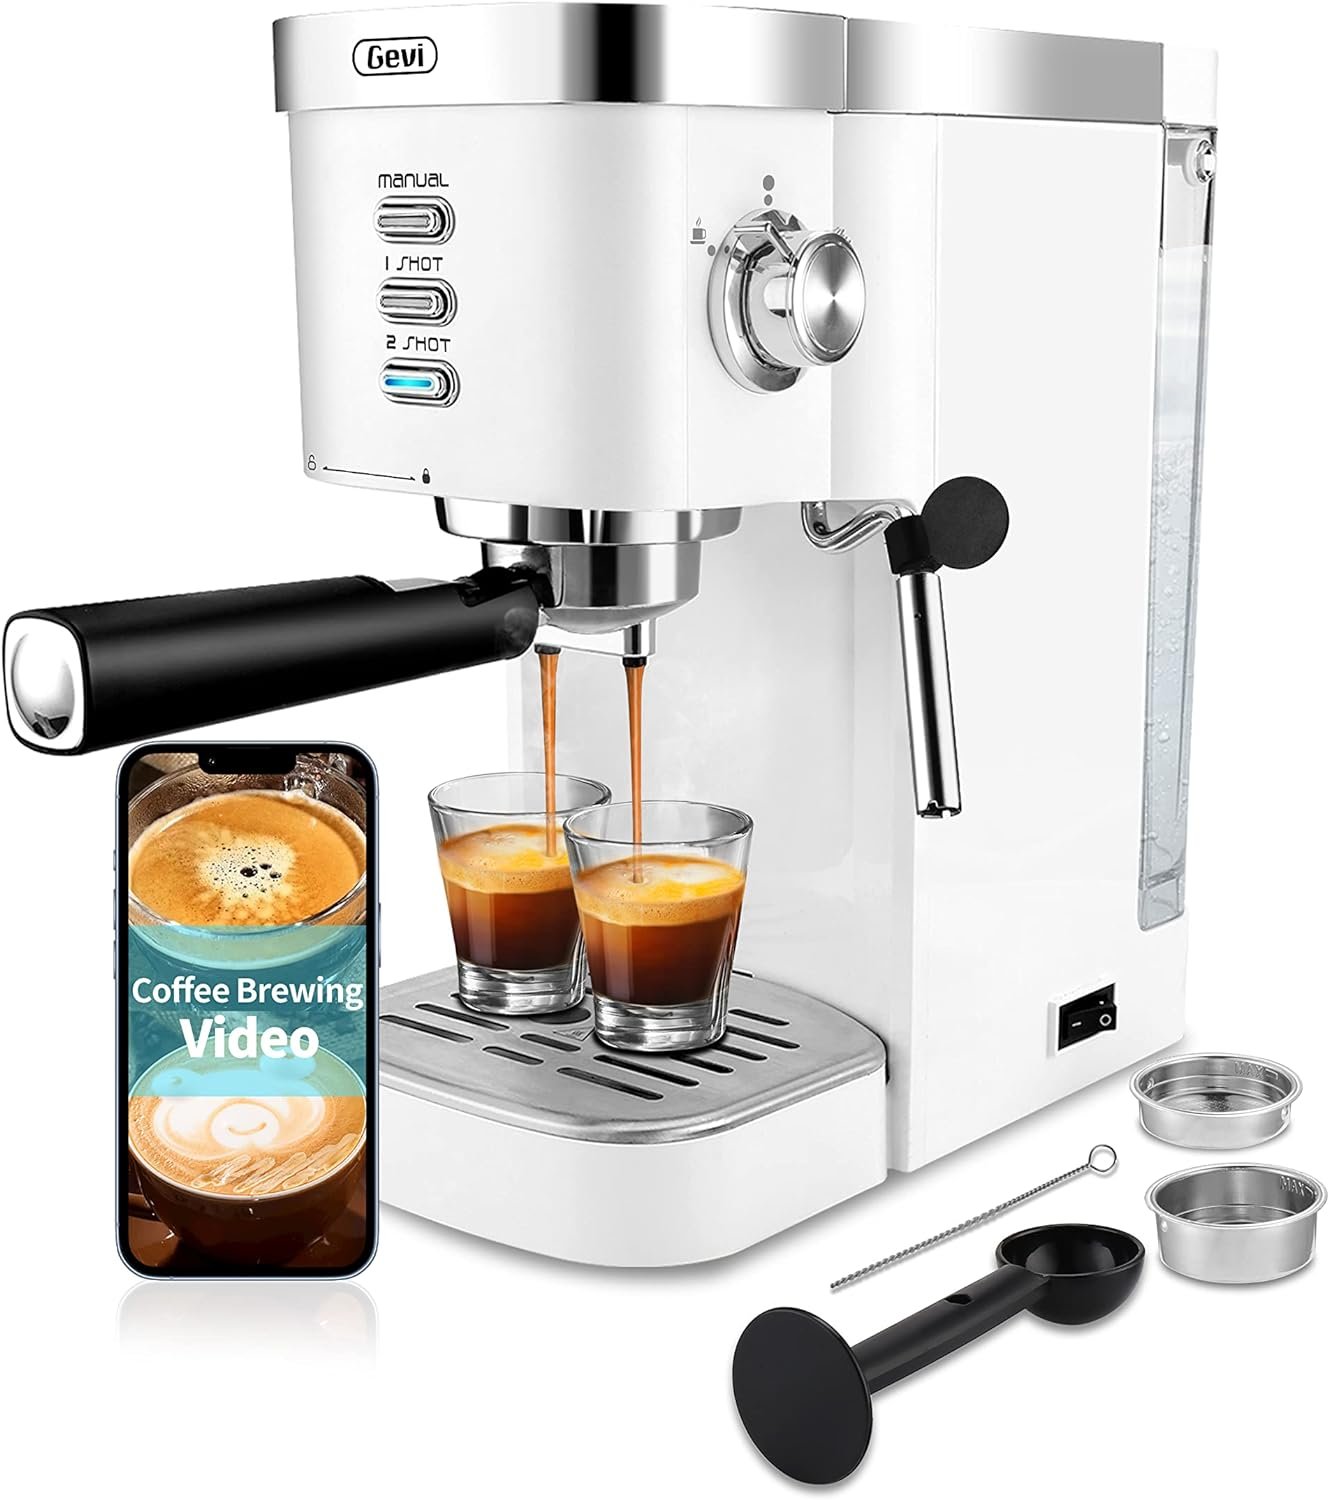 Gevi Espresso Machines 20 Bar Fast Heating Commercial Automatic Cappuccino Coffee Maker with Foaming Milk Frother Wand for Espresso, Latte Macchiato, 1.2L Removable Water Tank